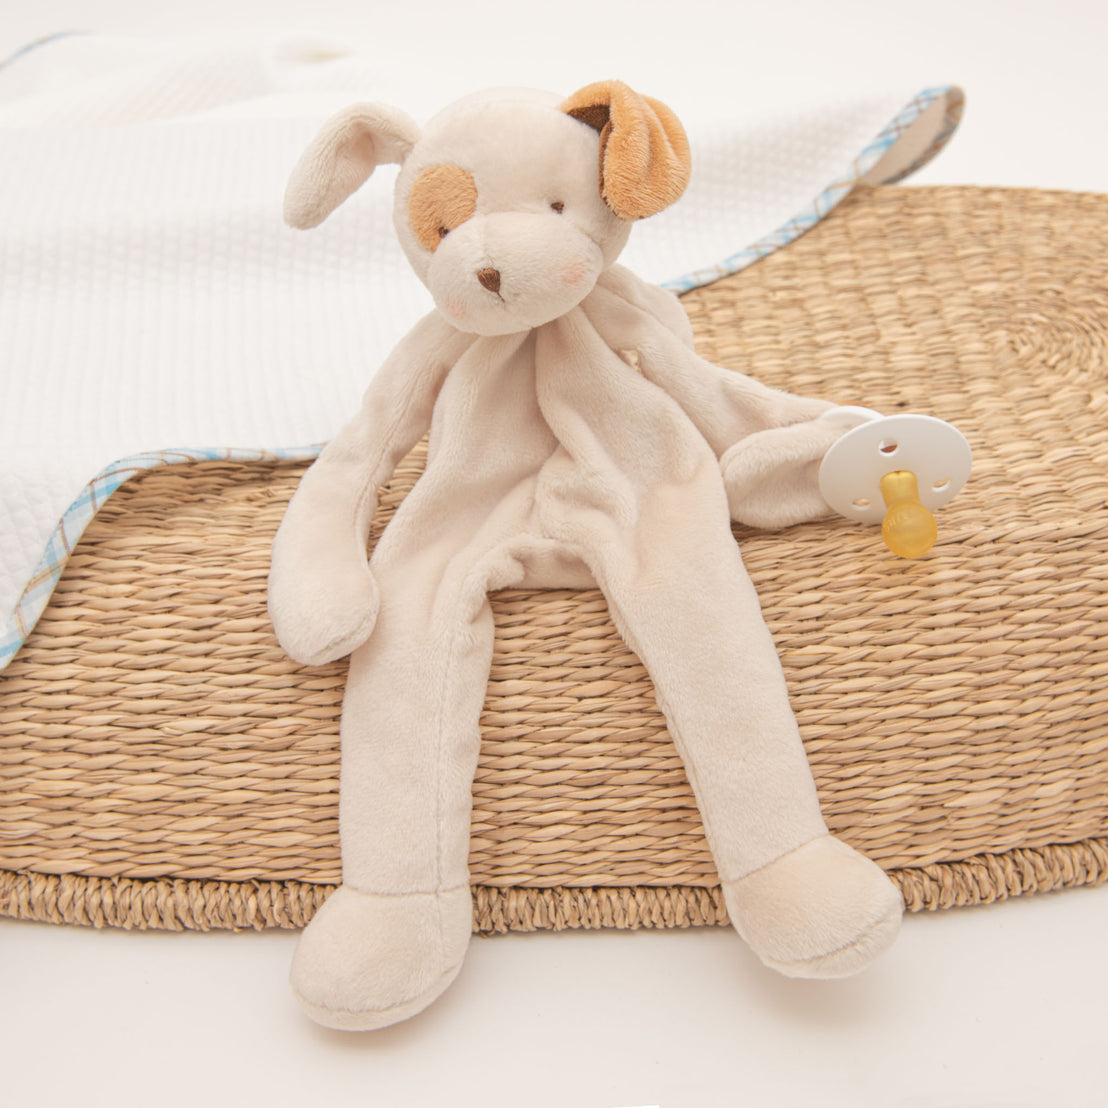 A Mason plush toy puppy, a white and light brown color scheme, sitting on a woven mat next to a baby blanket and holding a pacifier, perfect for a baptism.